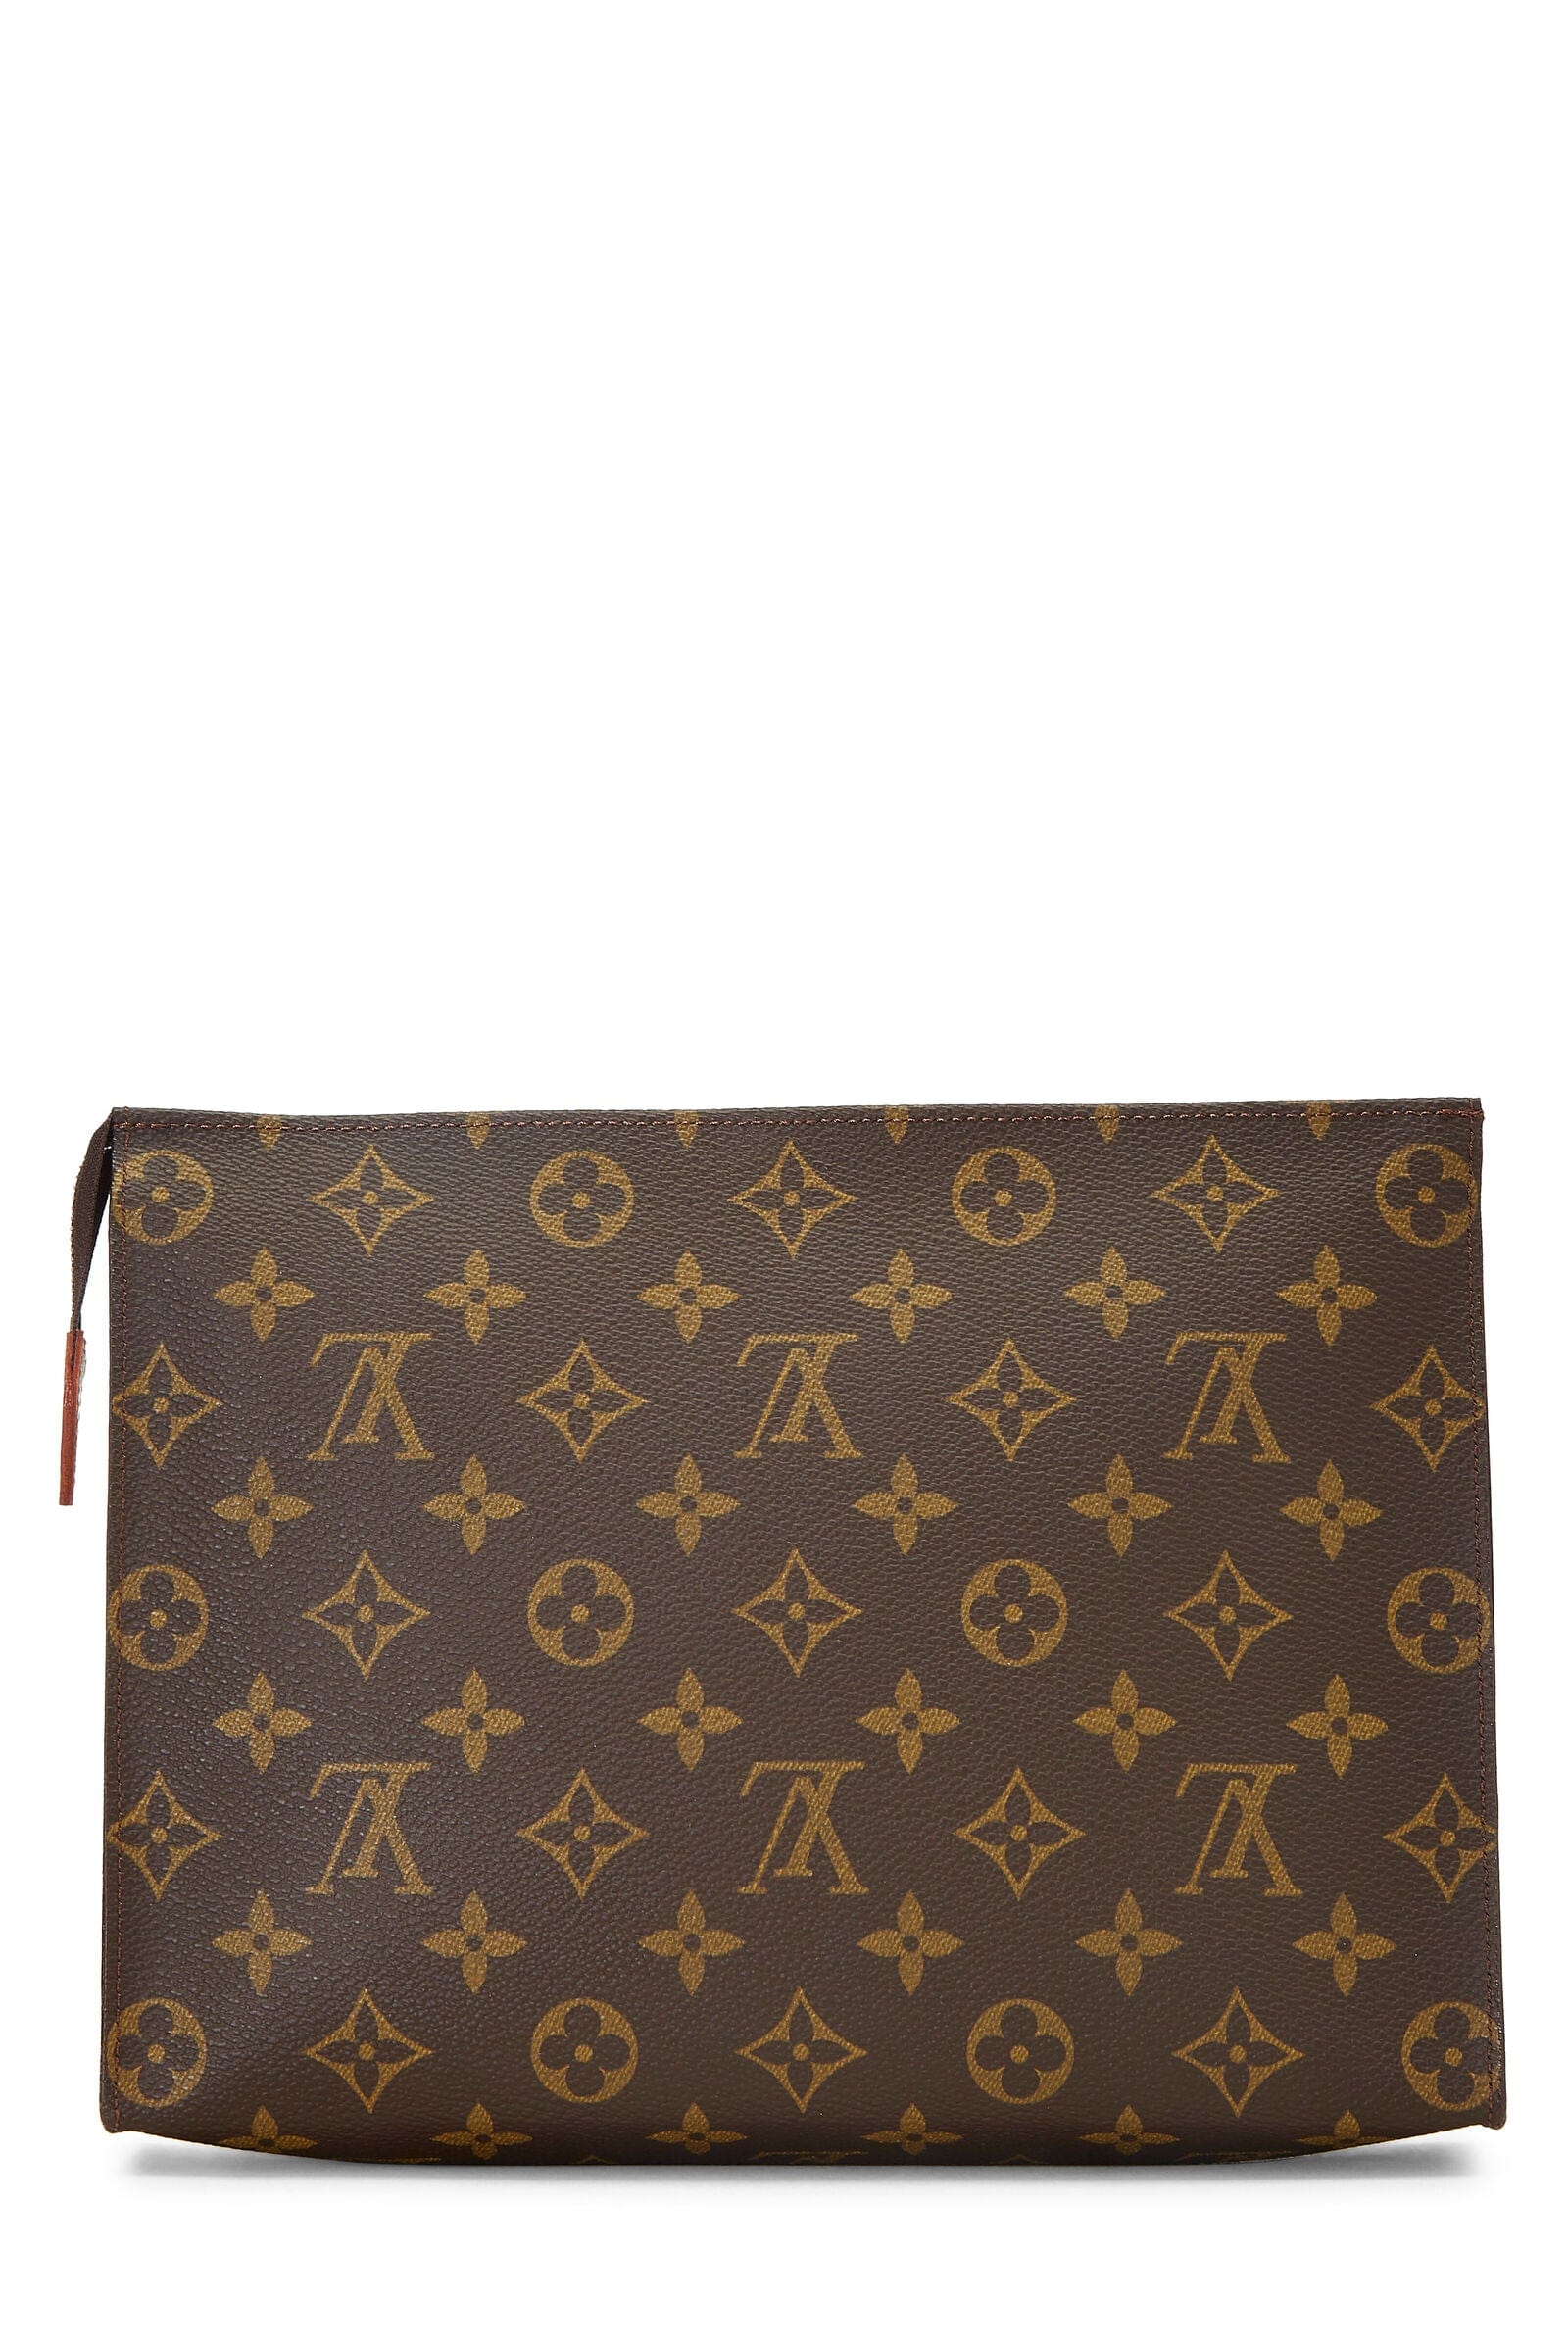  LV Toiletry Pouch 26 19 Tab Protector & Cover, Made With  Luxury Saffiano Leather (Black)